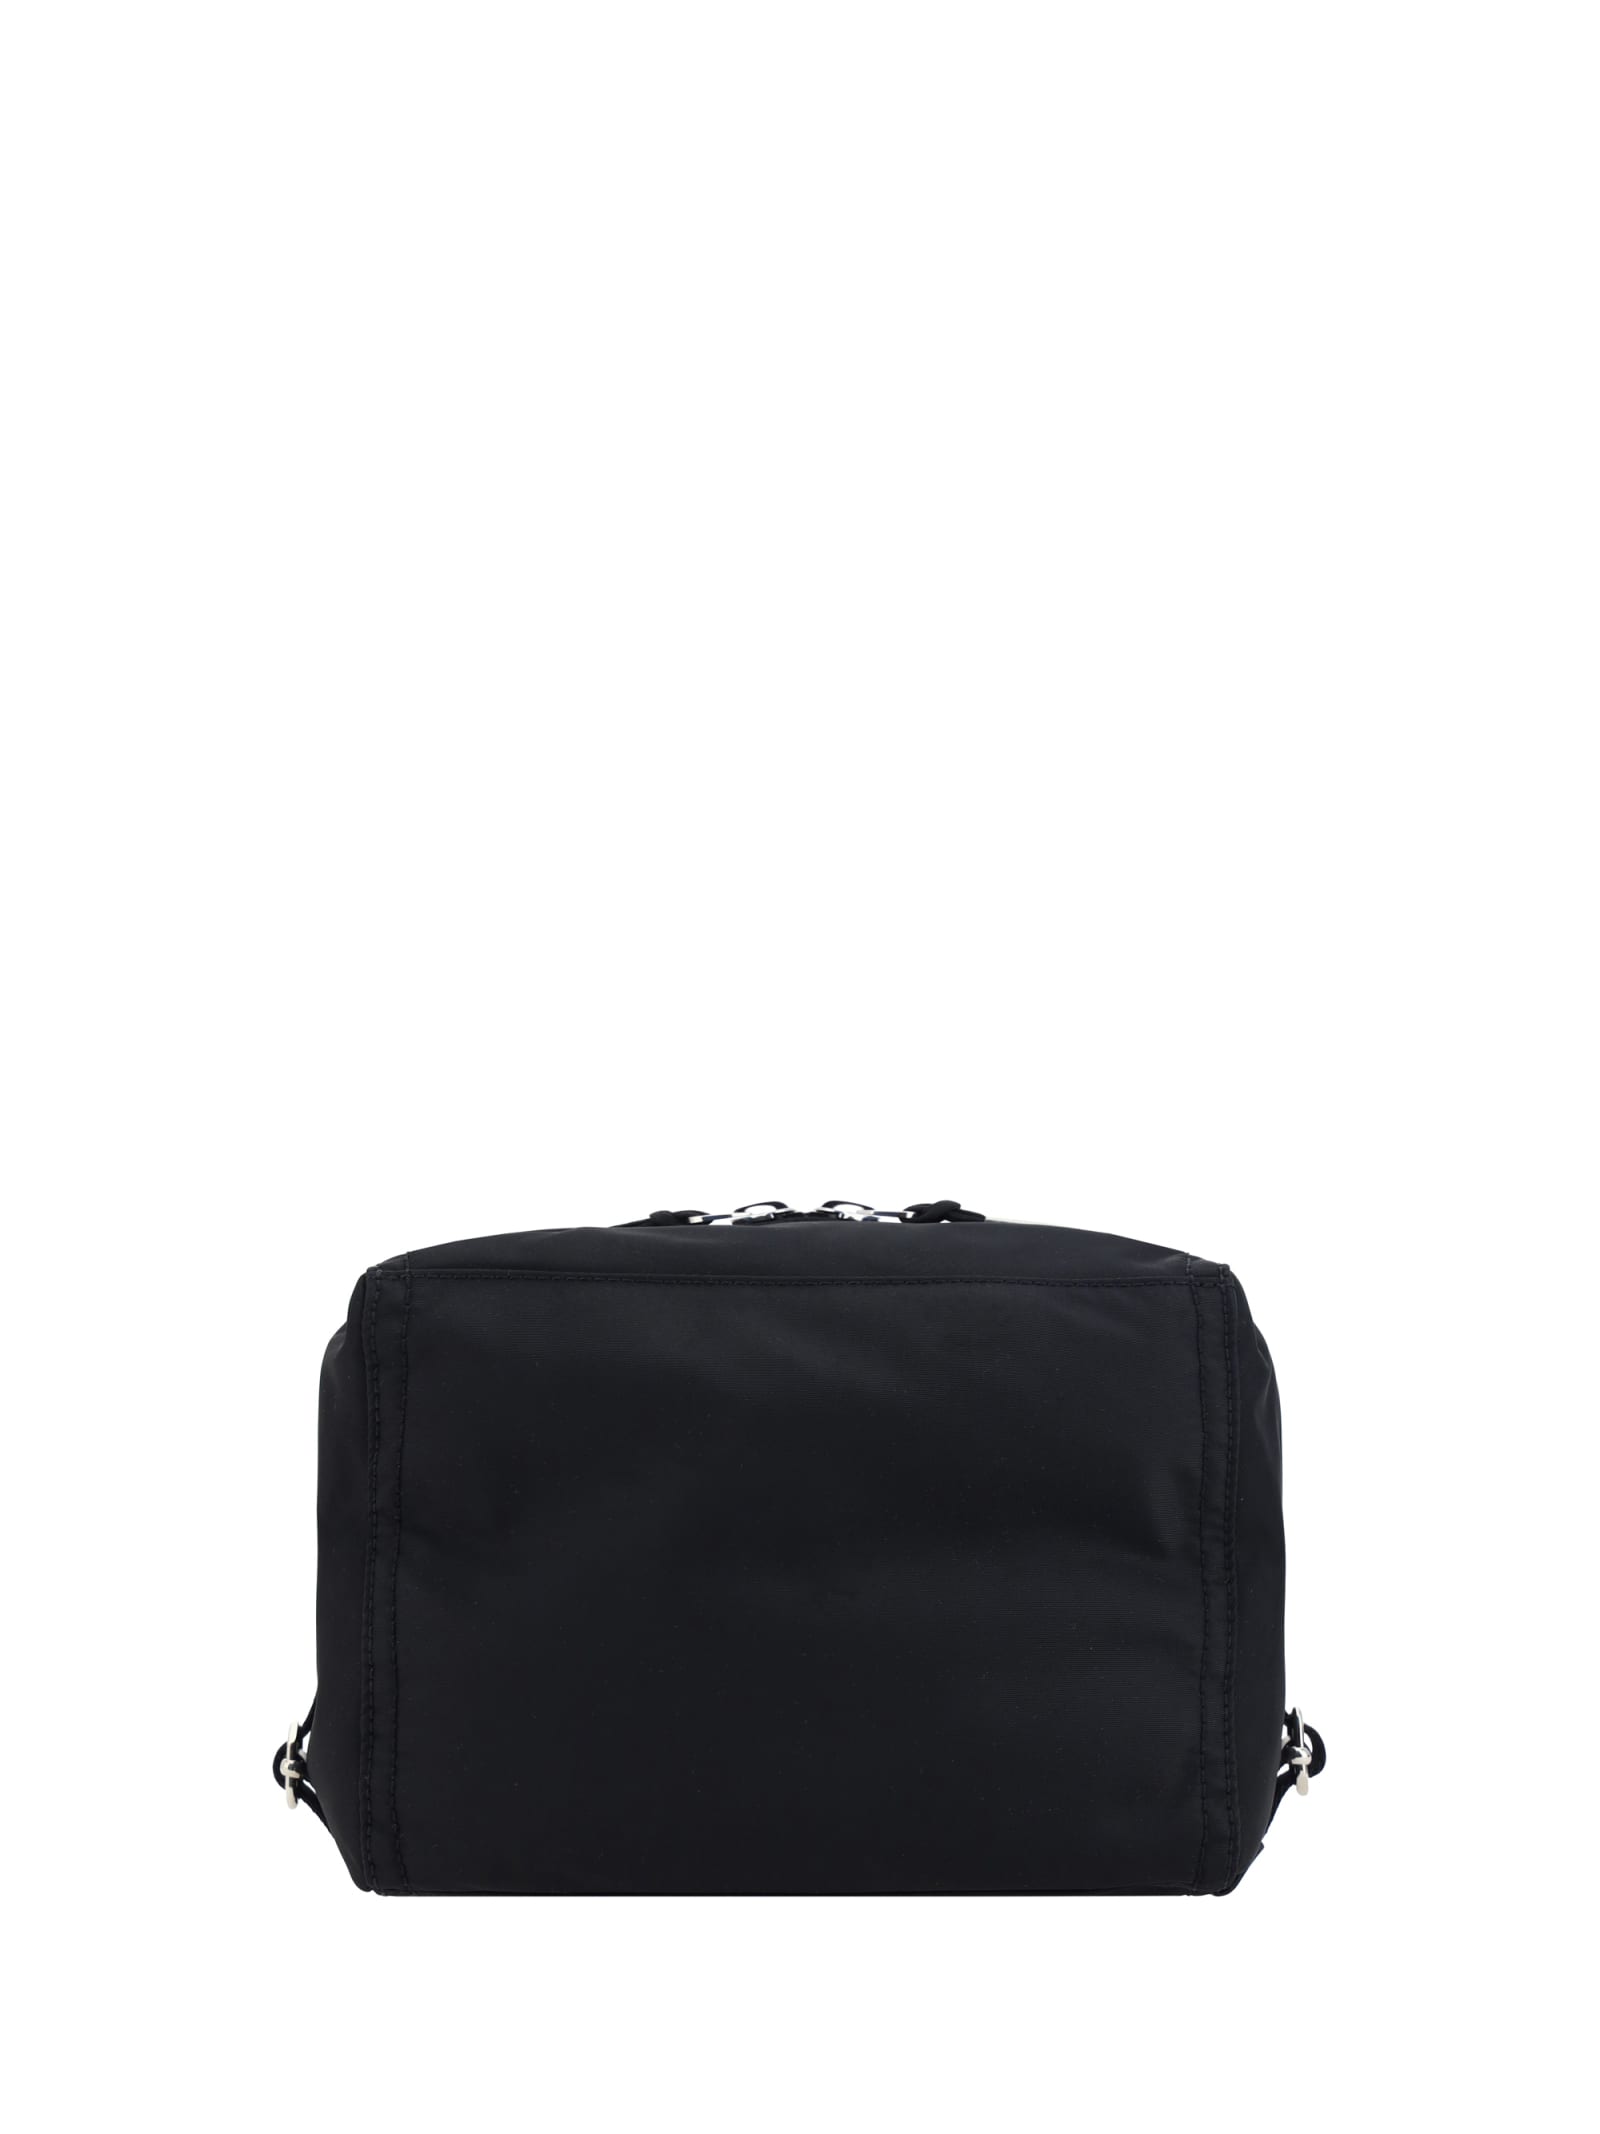 Givenchy Pandora Fanny Pack In Black